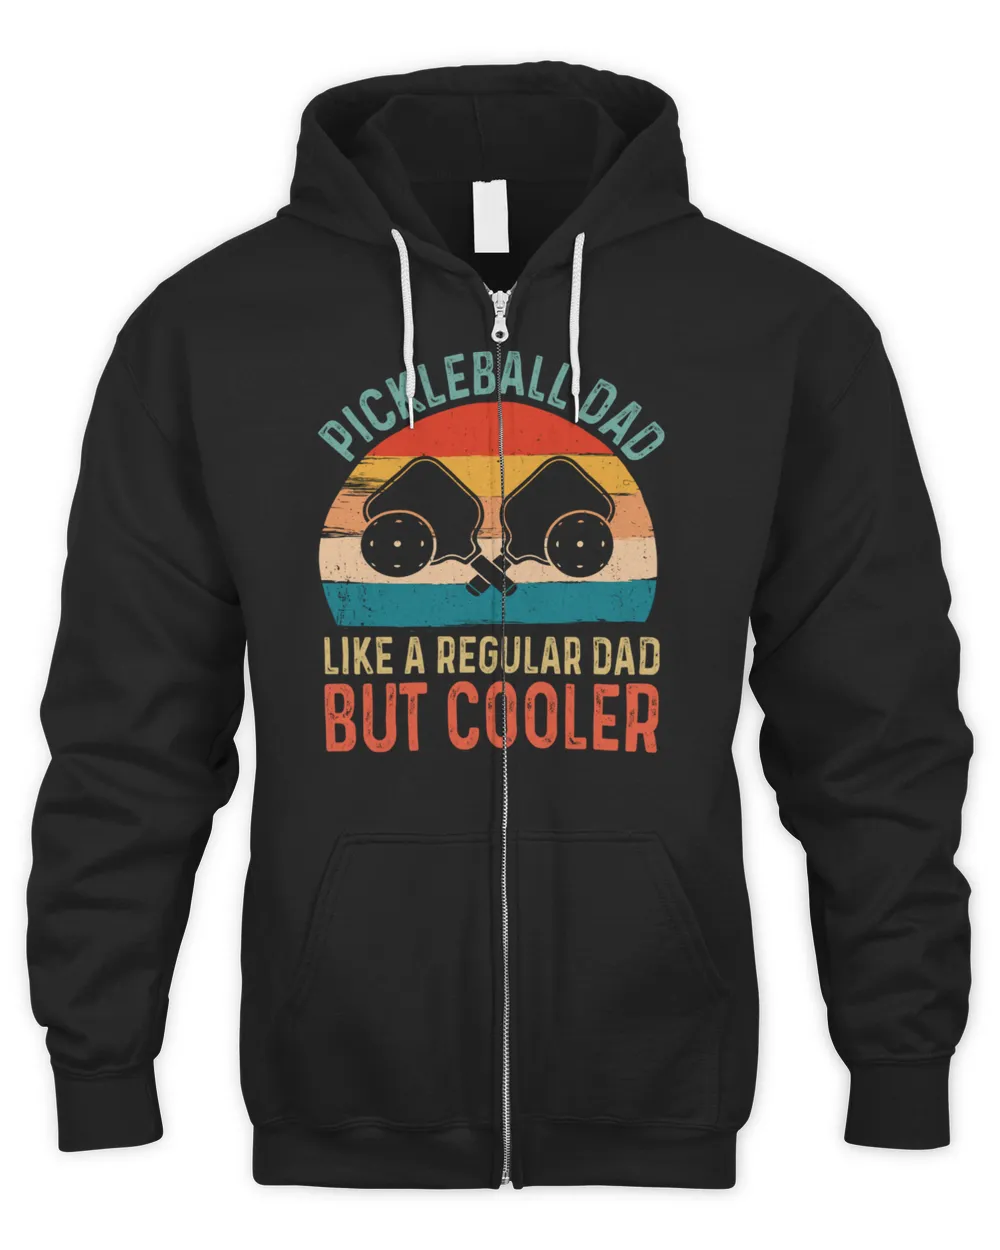 Pickleball Dad Like Regular Dad But Cooler, Vintage Retired Pickleball Player Coach Fathers Day For